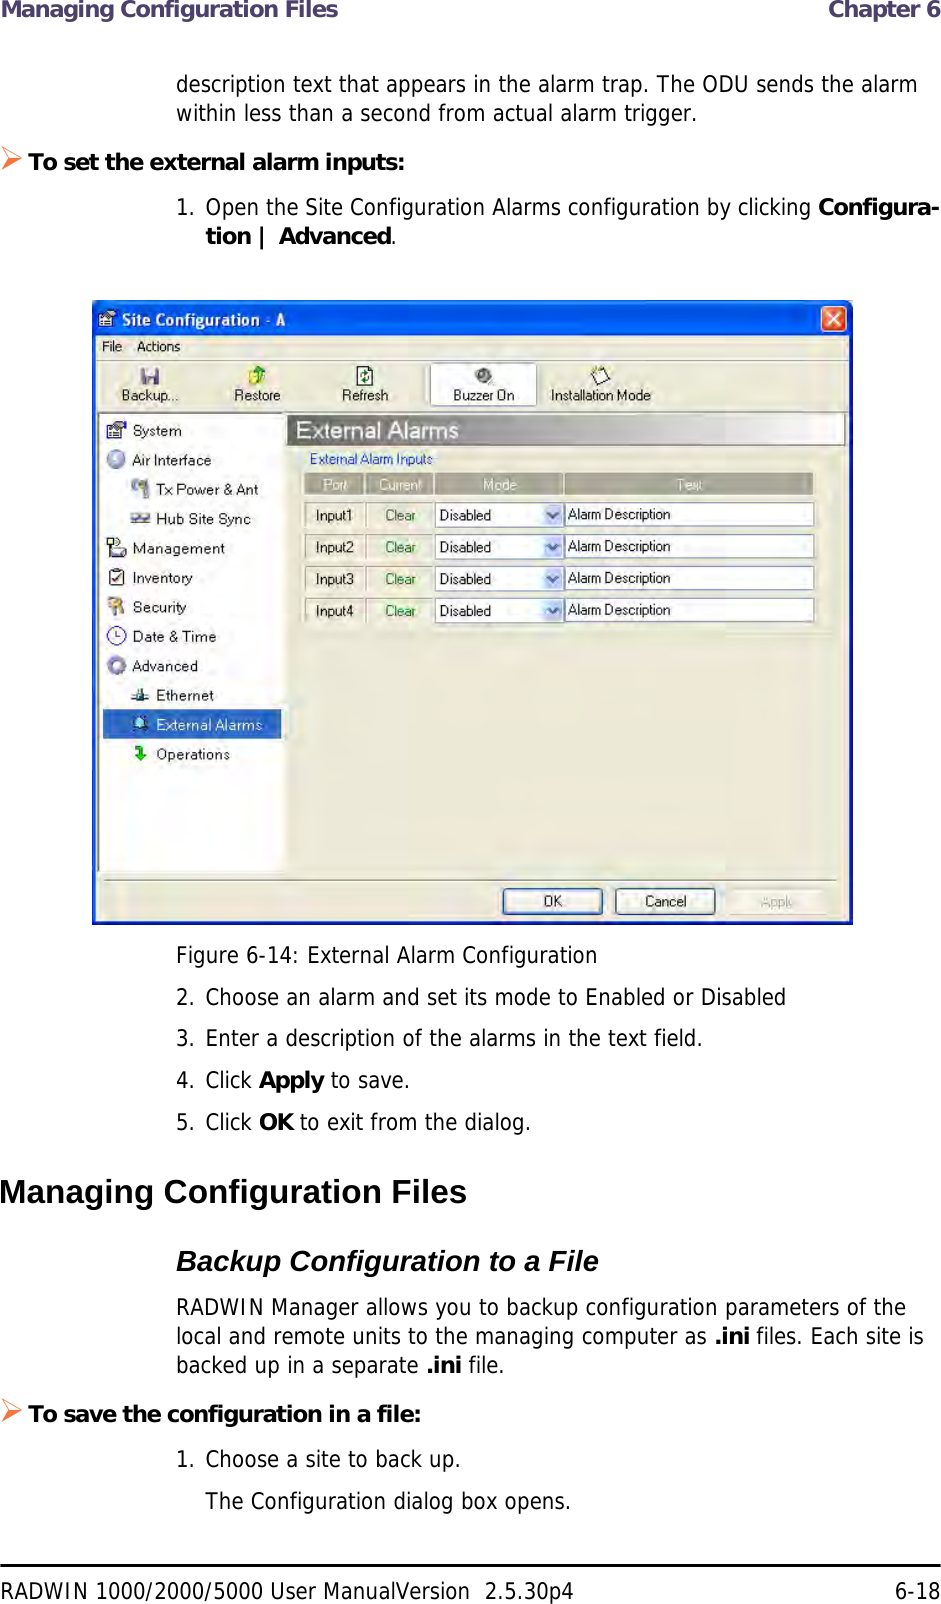 Managing Configuration Files  Chapter 6RADWIN 1000/2000/5000 User ManualVersion  2.5.30p4 6-18description text that appears in the alarm trap. The ODU sends the alarm within less than a second from actual alarm trigger.To set the external alarm inputs:1. Open the Site Configuration Alarms configuration by clicking Configura-tion | Advanced.Figure 6-14: External Alarm Configuration2. Choose an alarm and set its mode to Enabled or Disabled3. Enter a description of the alarms in the text field.4. Click Apply to save.5. Click OK to exit from the dialog.Managing Configuration FilesBackup Configuration to a FileRADWIN Manager allows you to backup configuration parameters of the local and remote units to the managing computer as .ini files. Each site is backed up in a separate .ini file.To save the configuration in a file:1. Choose a site to back up.The Configuration dialog box opens.